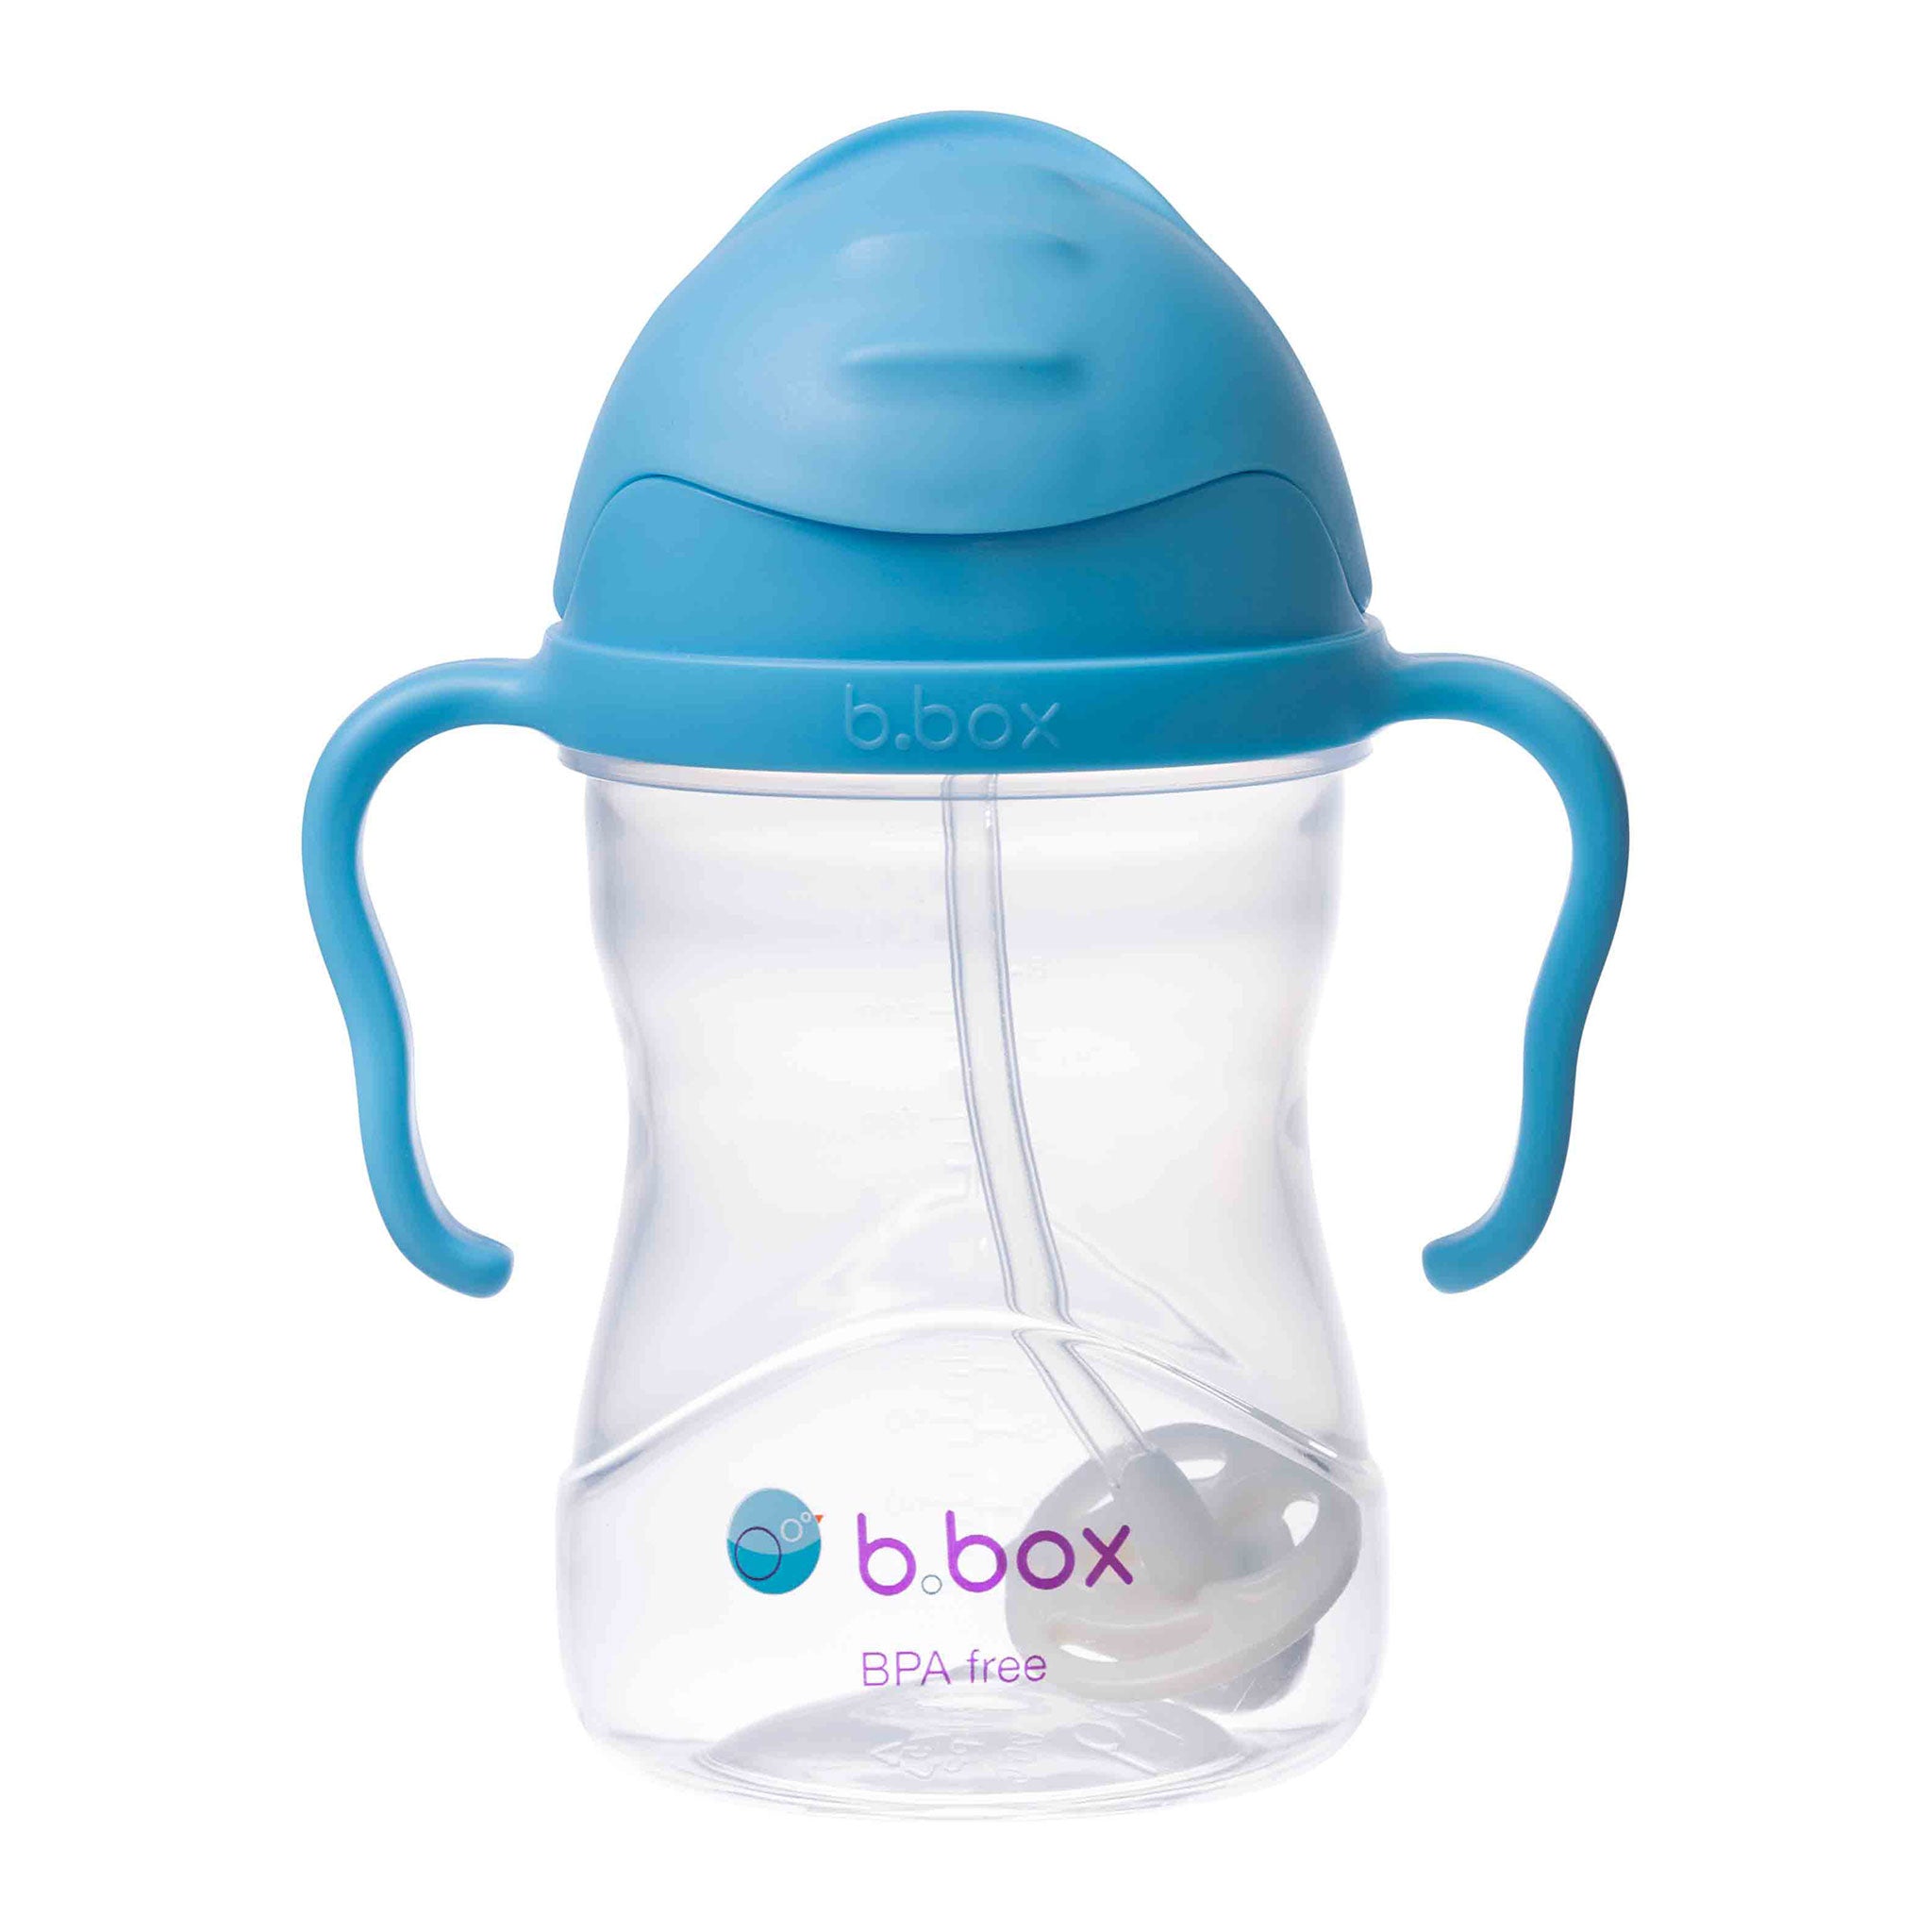 b.box* Sippy cup ストローマグ シッピーカップ - blueberry